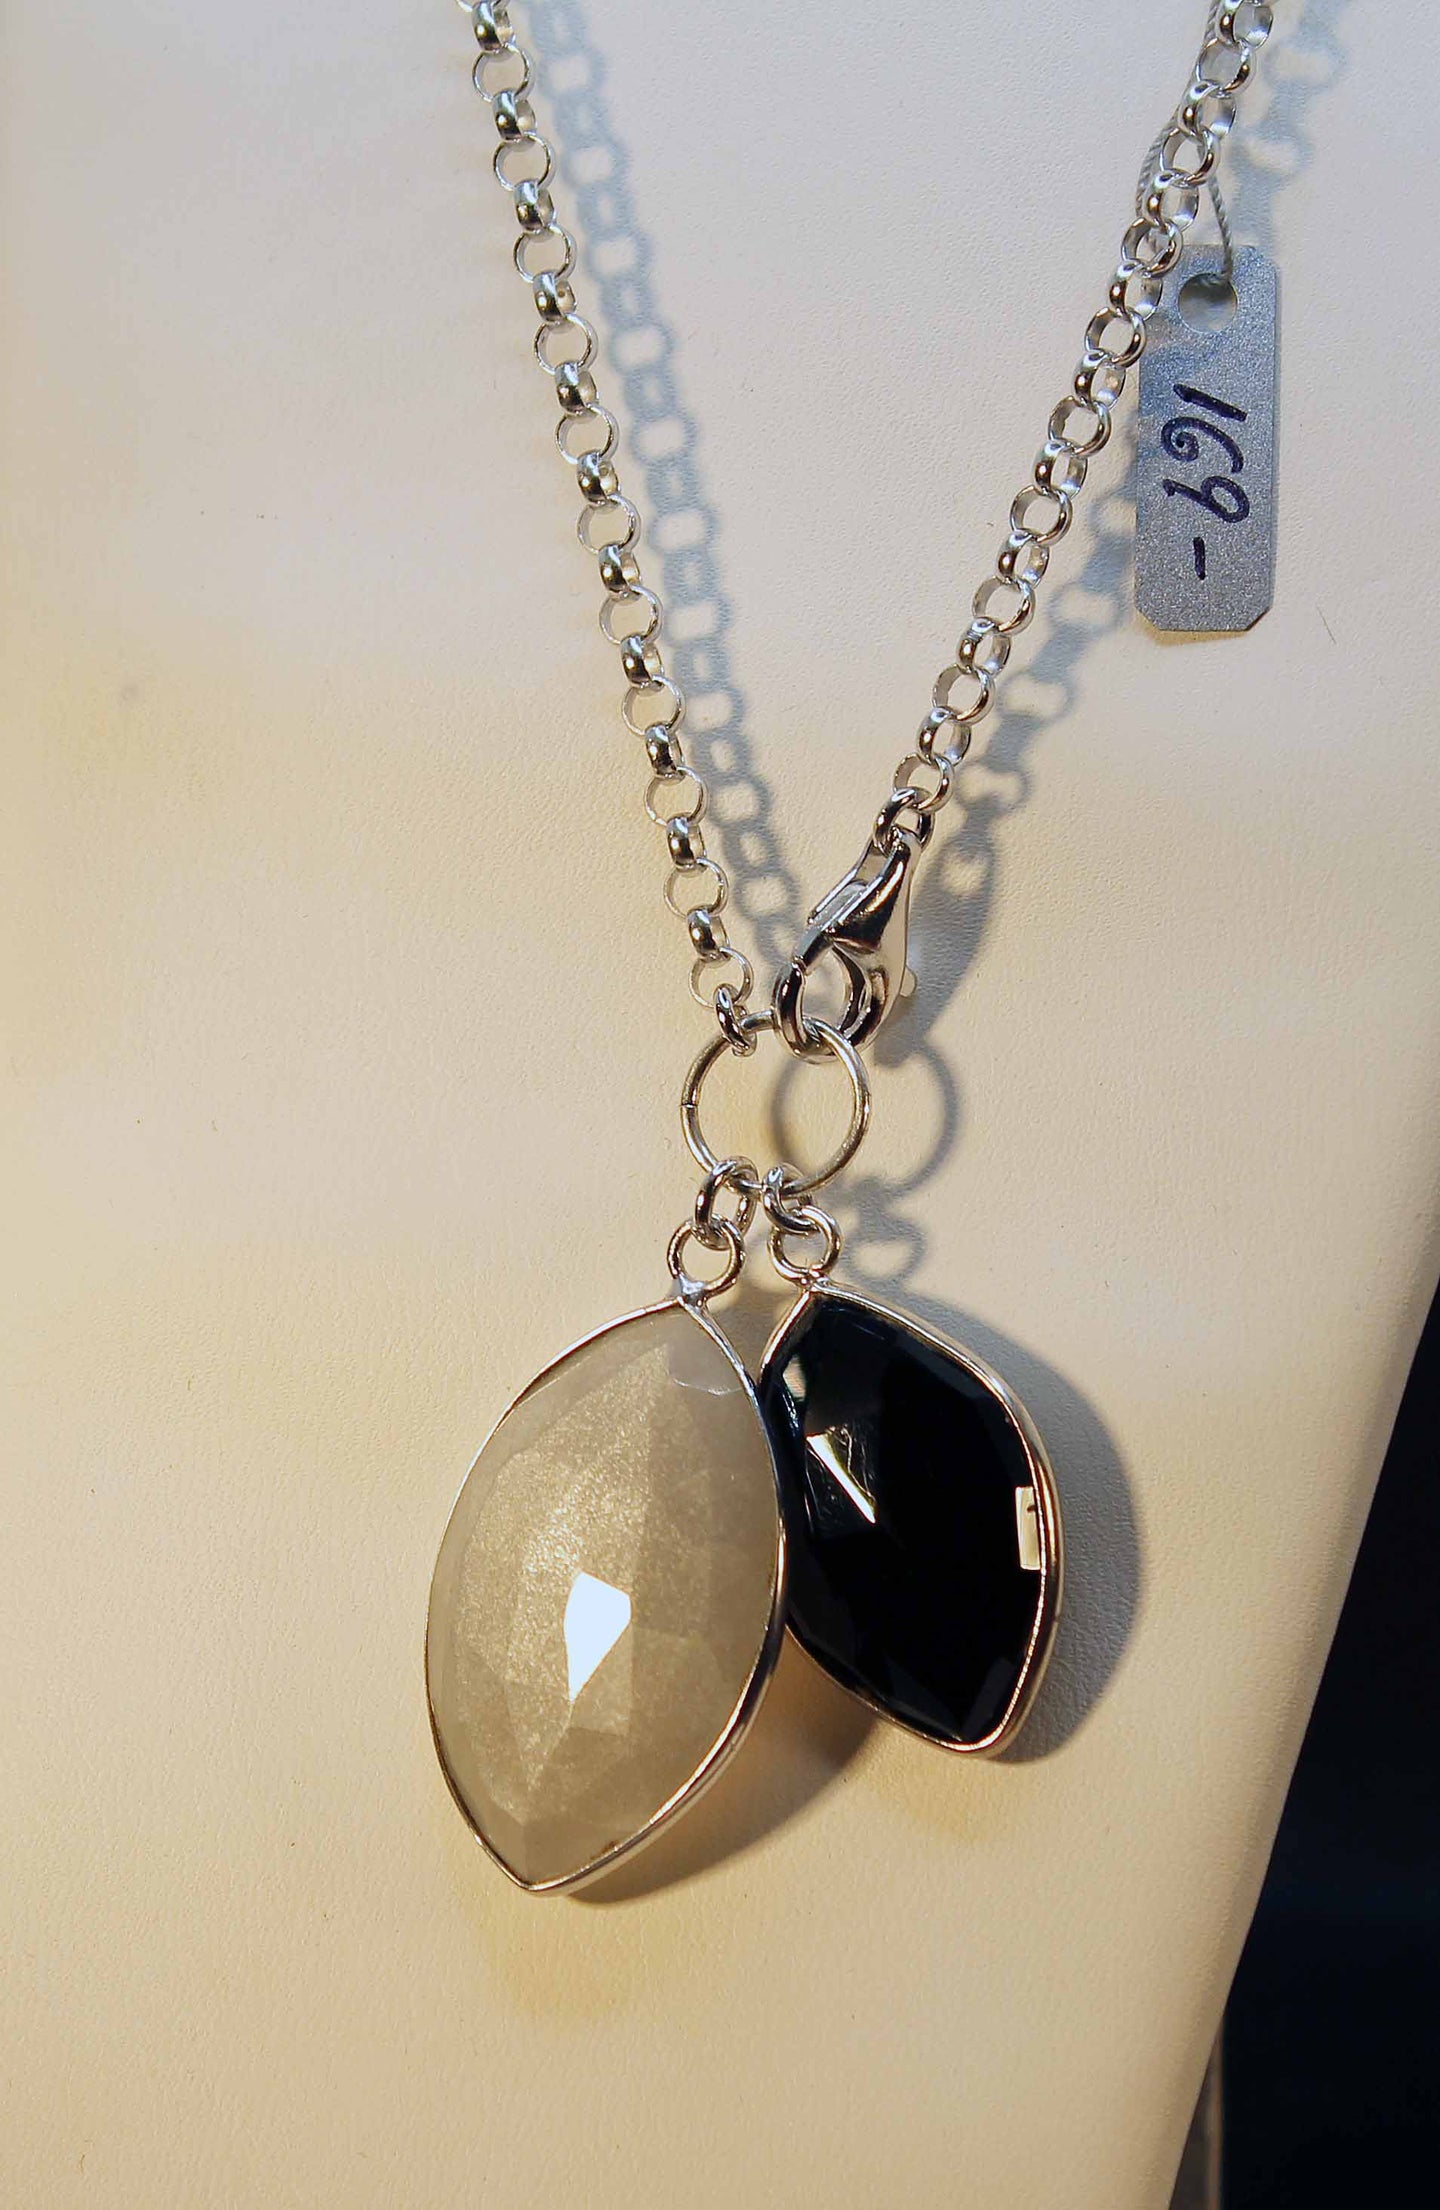 Sterling silver, rhodium finish necklace with grey moonstone and black onyx pendants